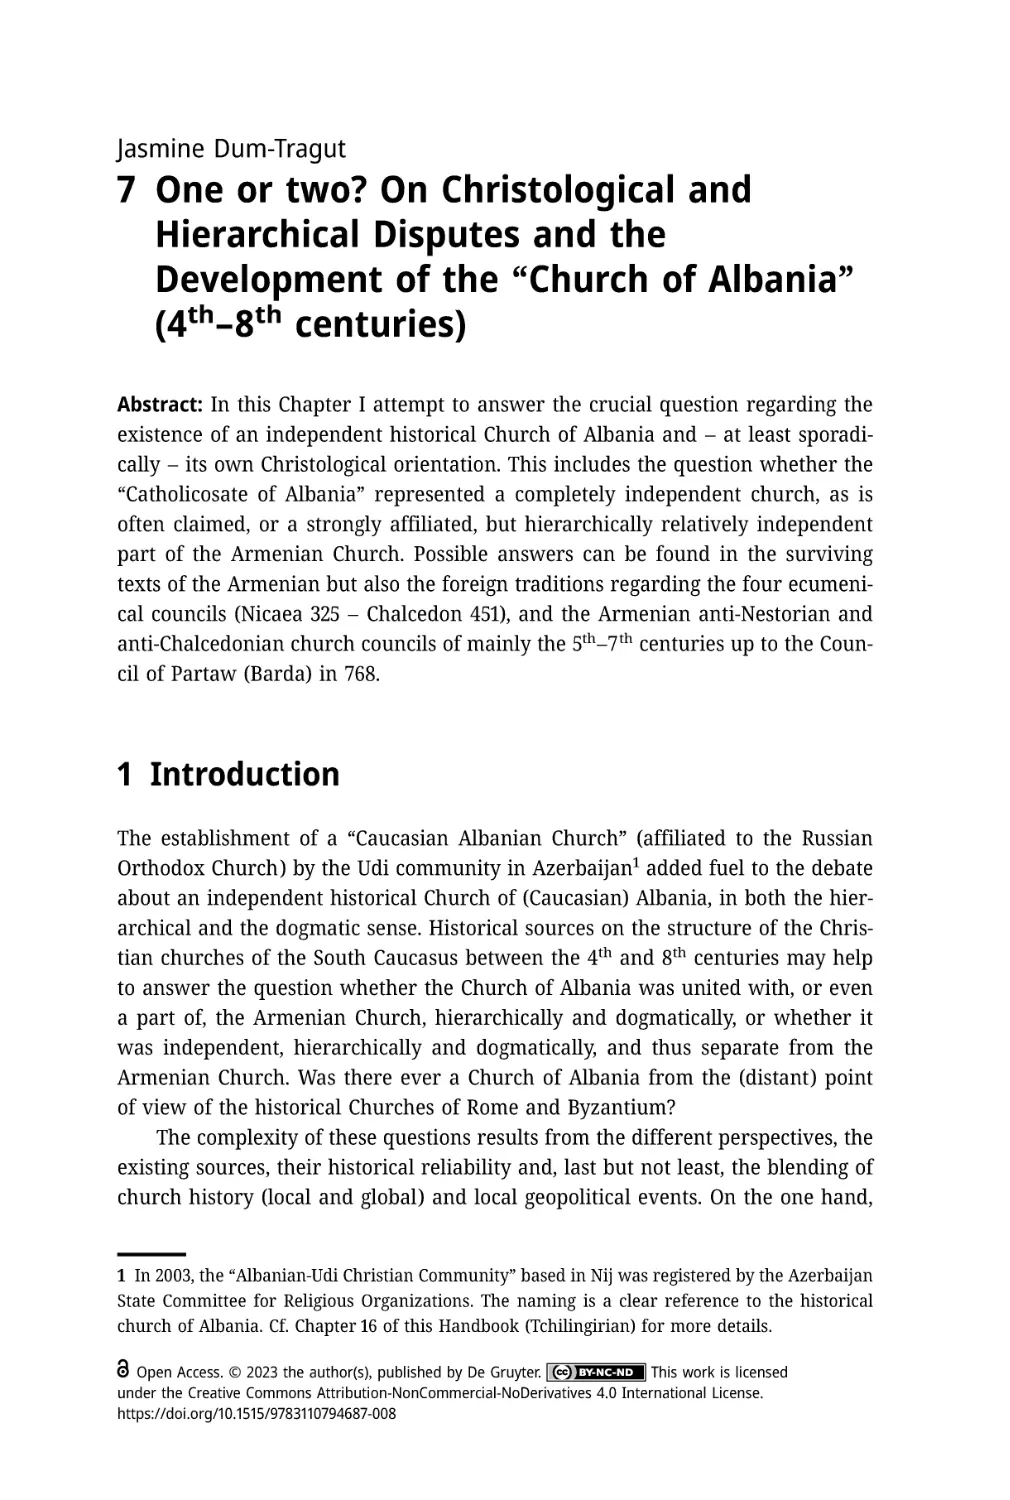 7 One or two? On Christological and Hierarchical Disputes and the Development of the “Church of Albania” (4<sup>th</sup>–8<sup>th</sup> centuries)